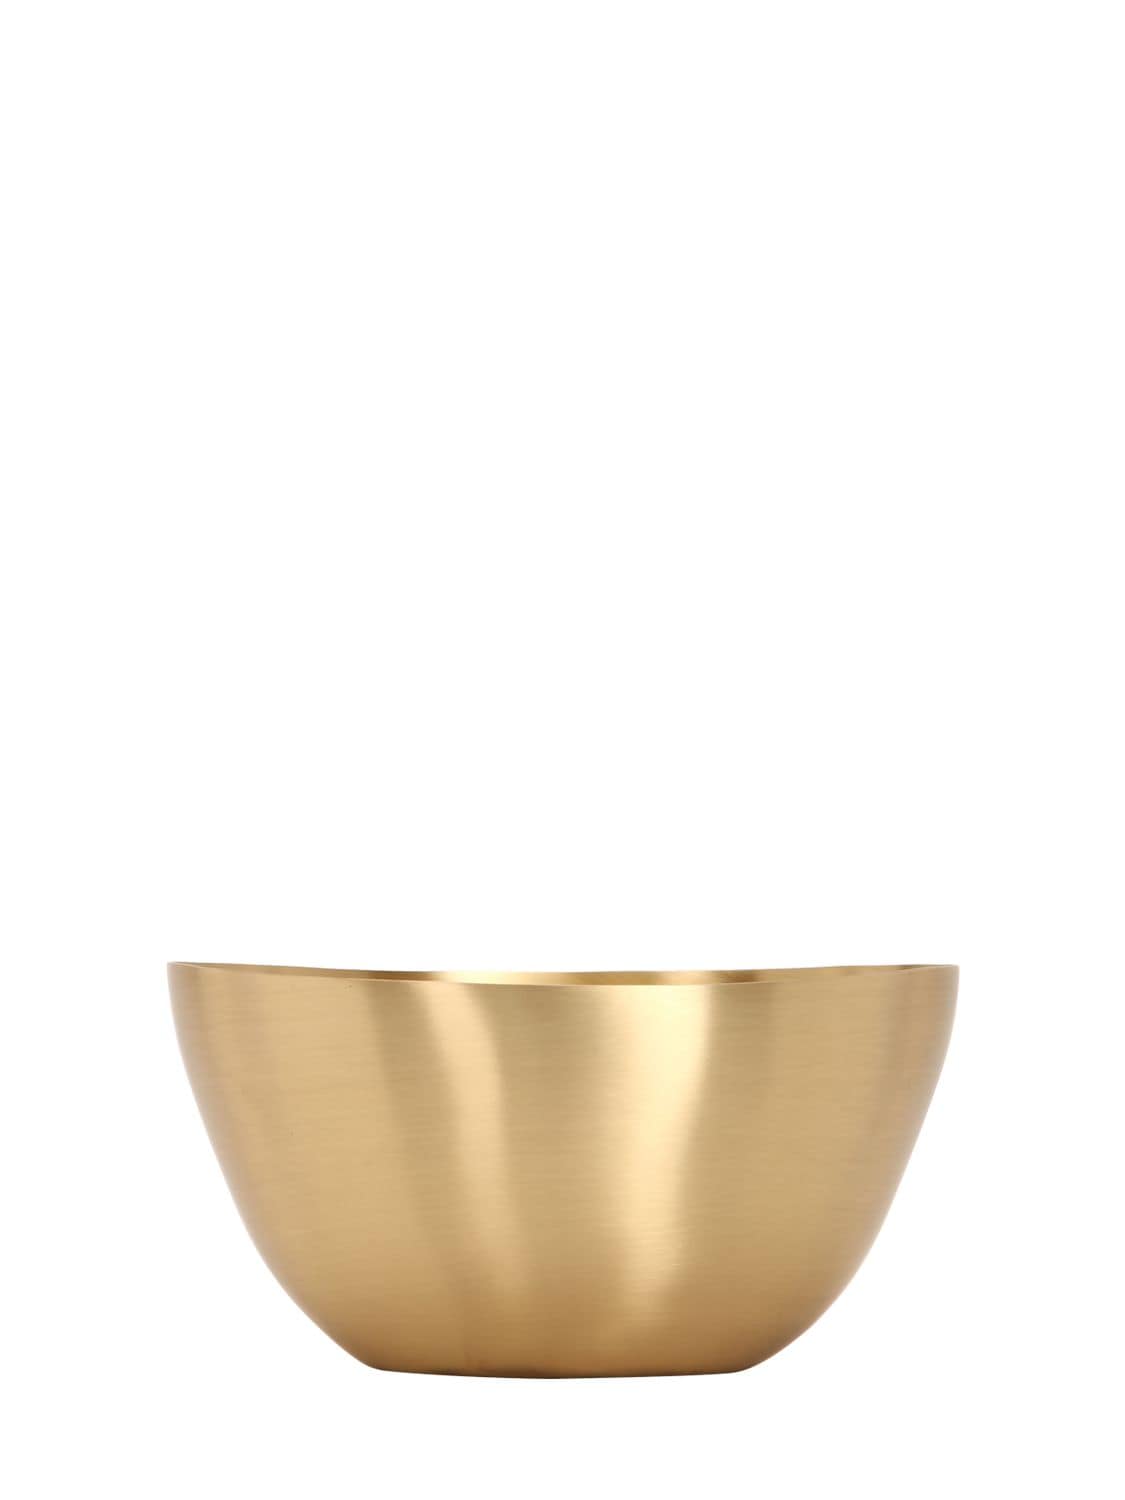 Armani/casa Ginger Large Brass Bowl In Gold